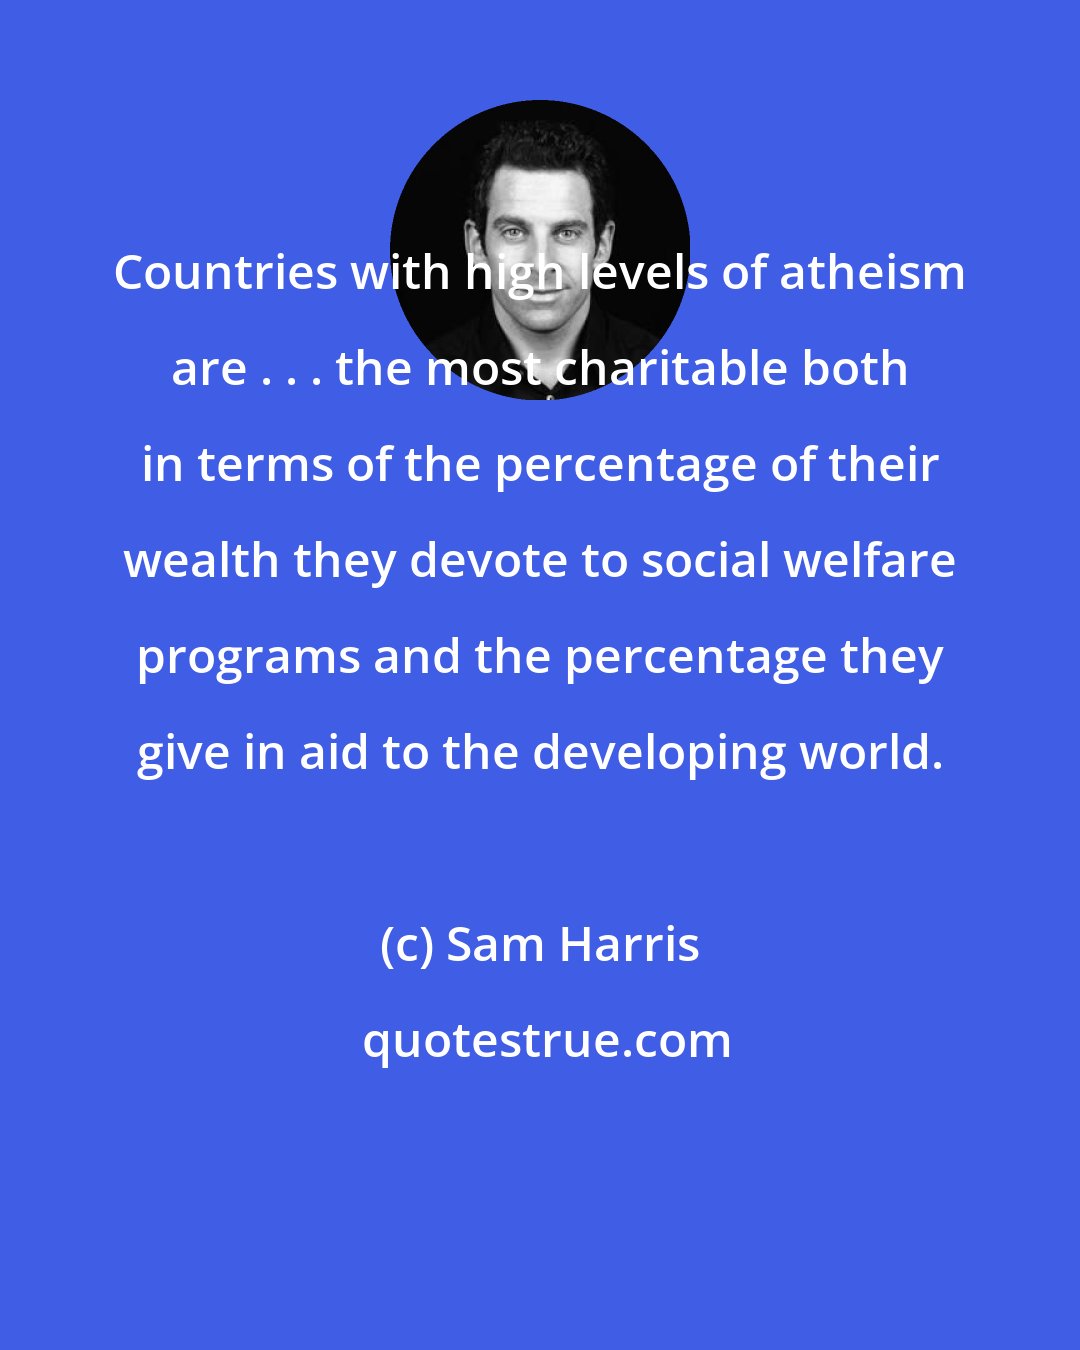 Sam Harris: Countries with high levels of atheism are . . . the most charitable both in terms of the percentage of their wealth they devote to social welfare programs and the percentage they give in aid to the developing world.